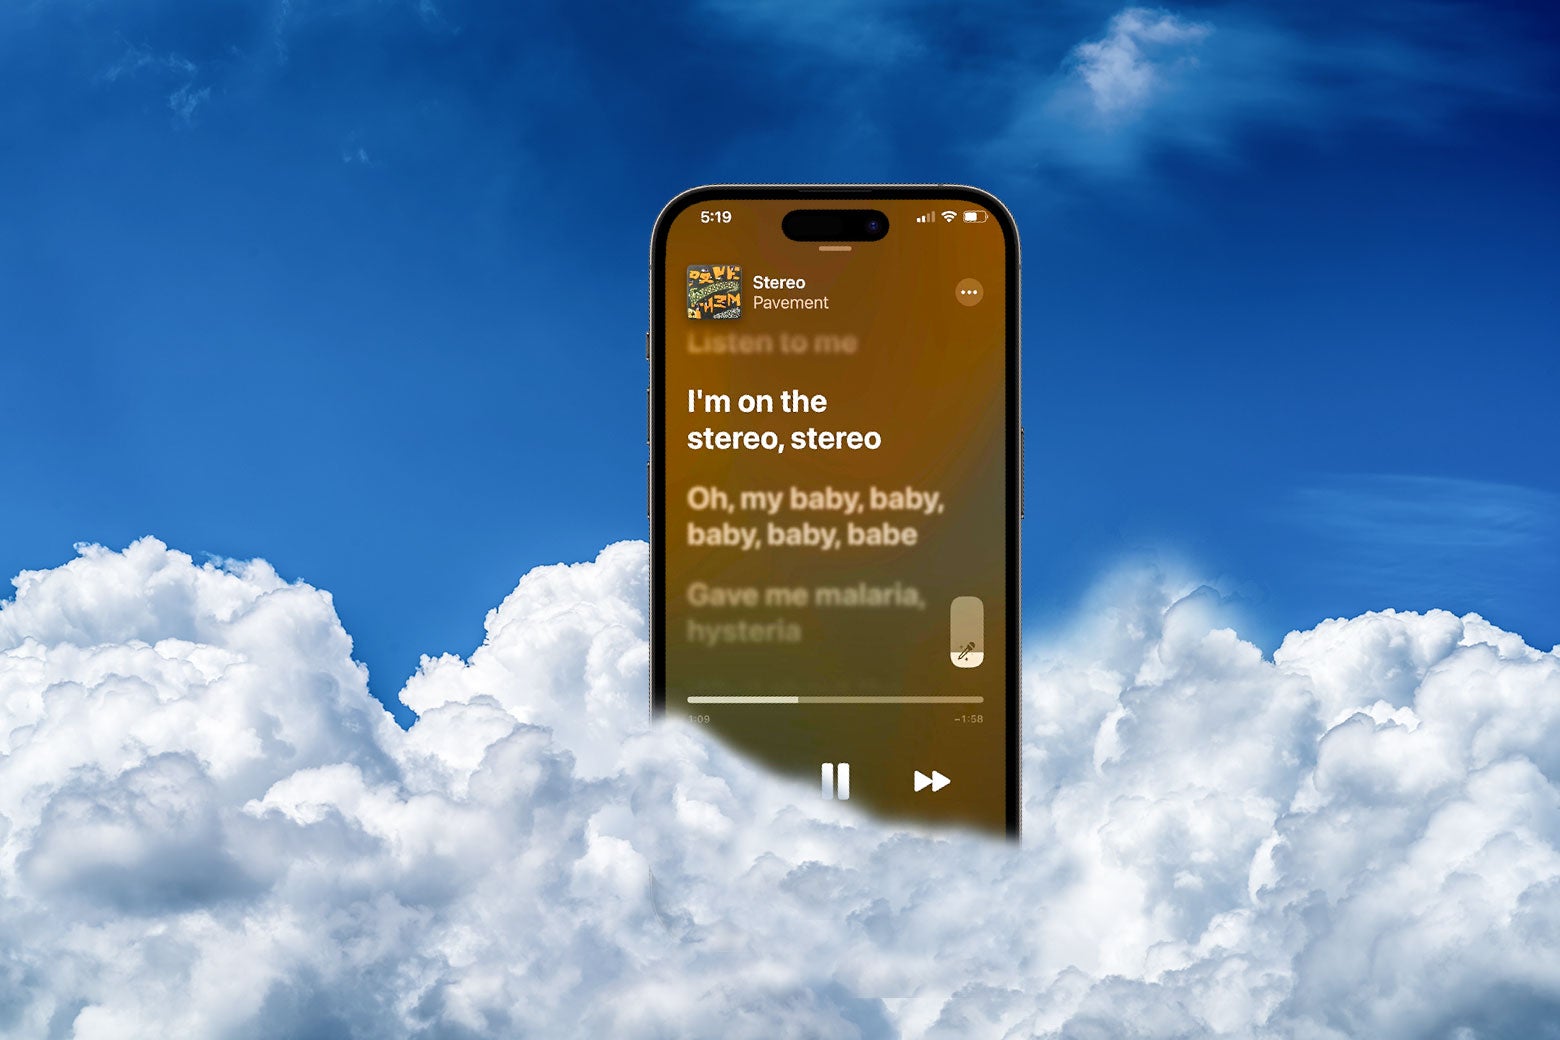 An iPhone in a celestial bank of clouds displays the karaoke lyrics to Pavement's song "Stereo."